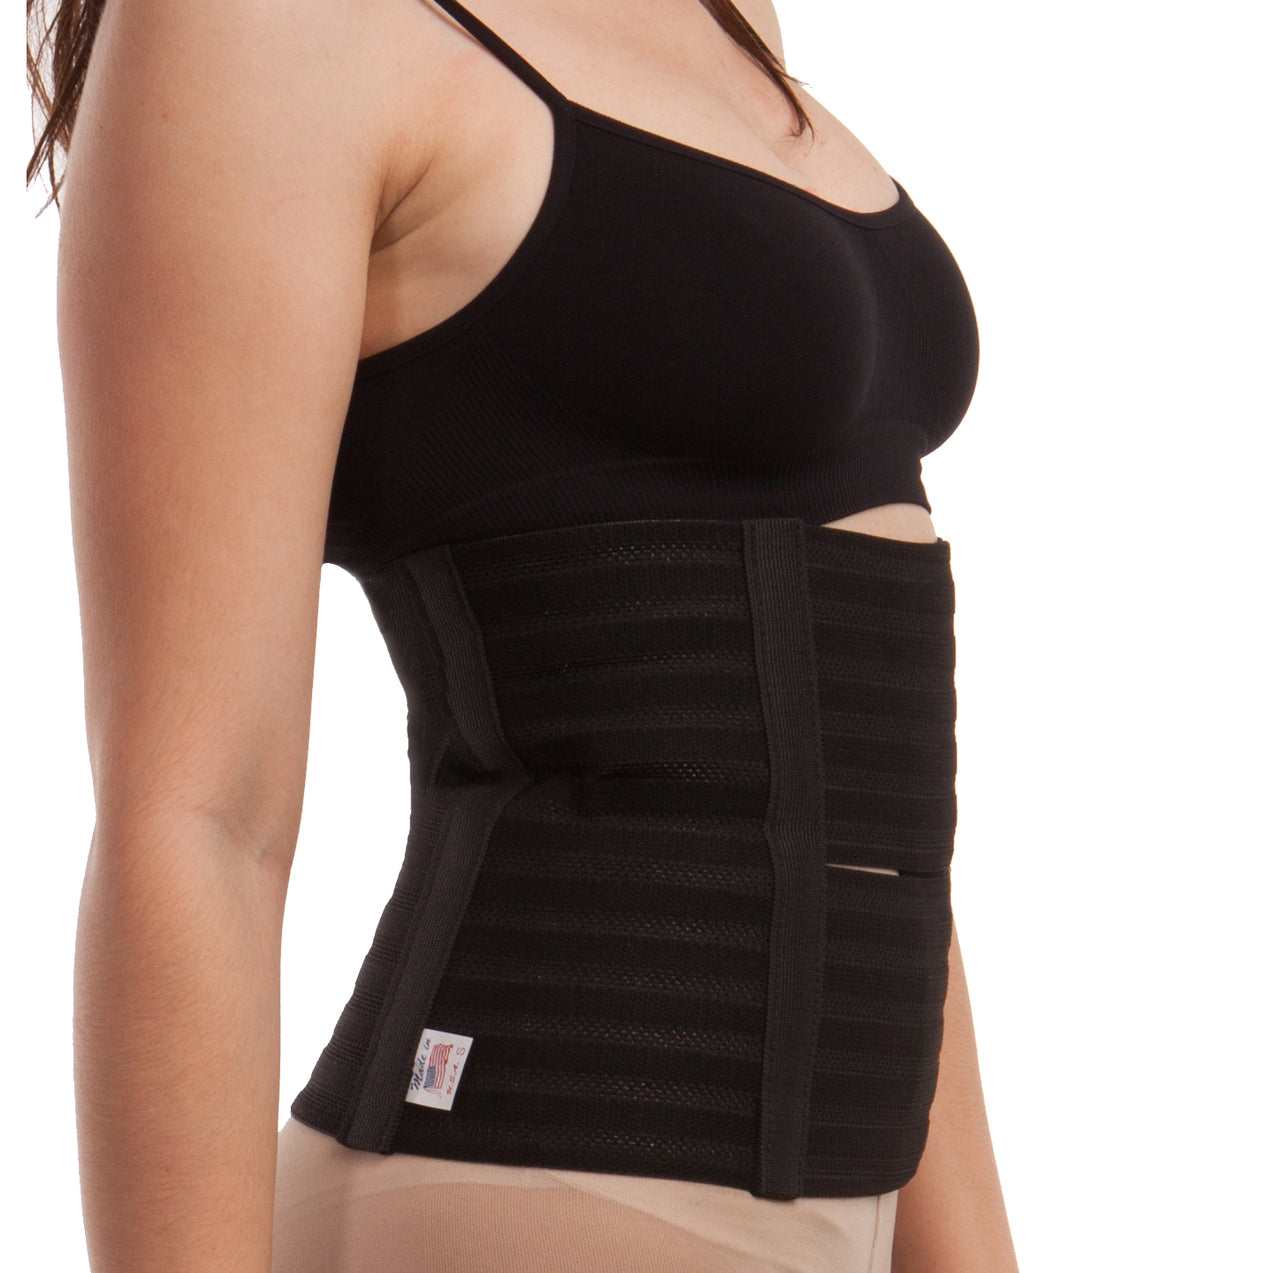 Women's Abdominal Post-Surgical & Body Shaping Binders - Medbarn Store